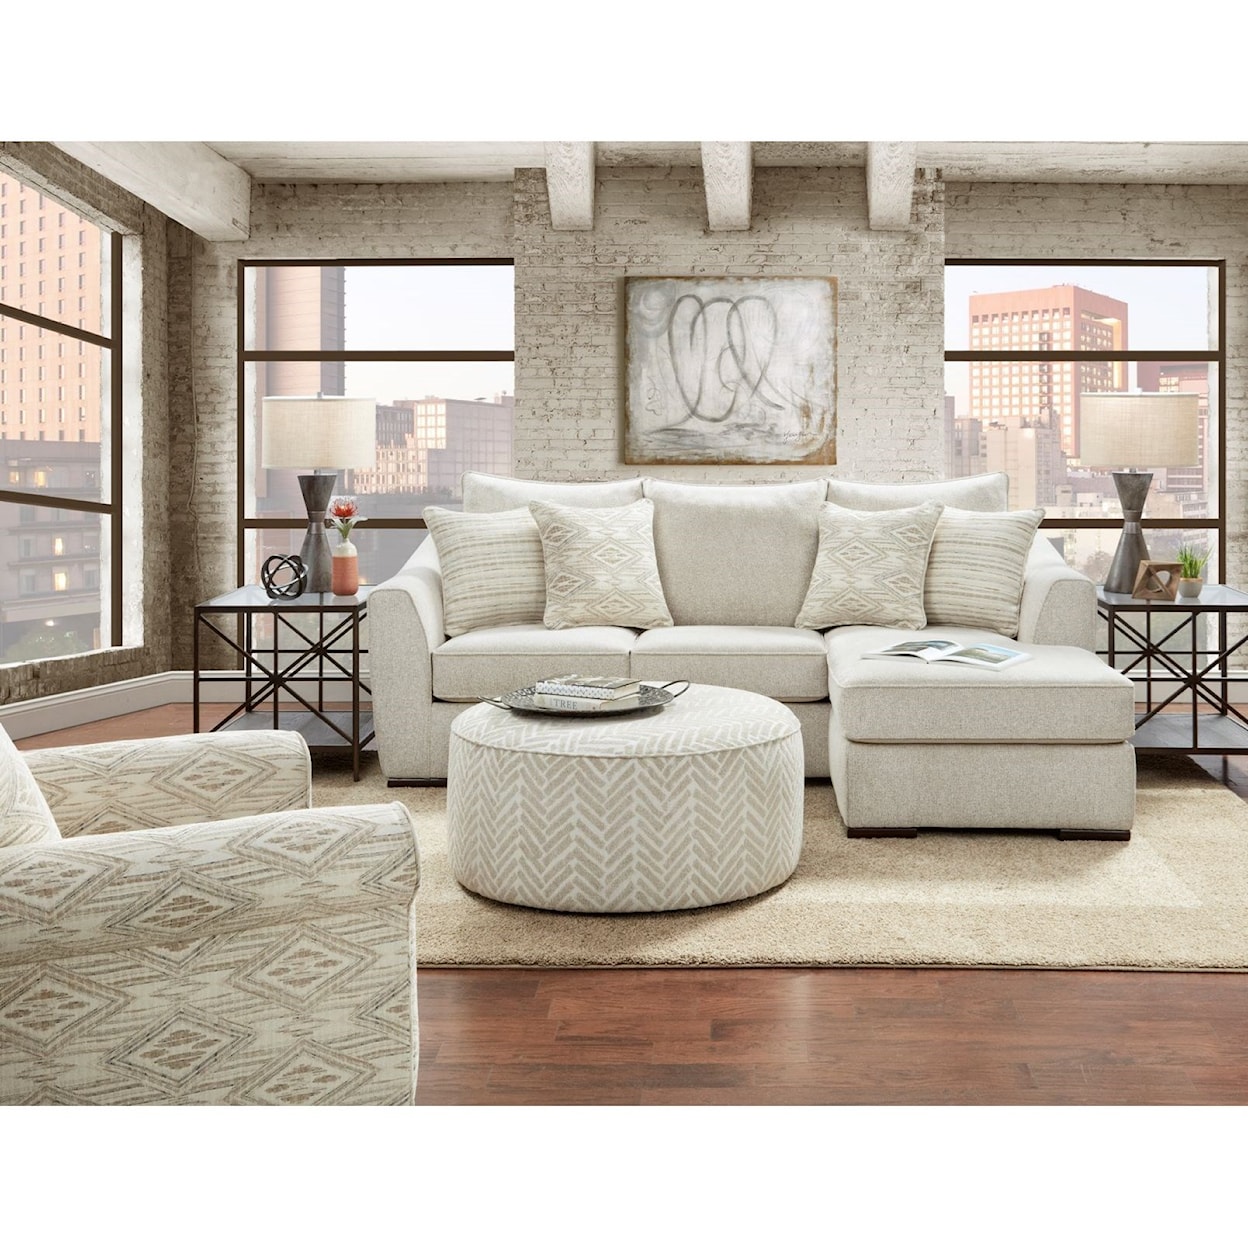 Fusion Furniture 9778 VIBRANT VISION OATMEAL Living Room Group